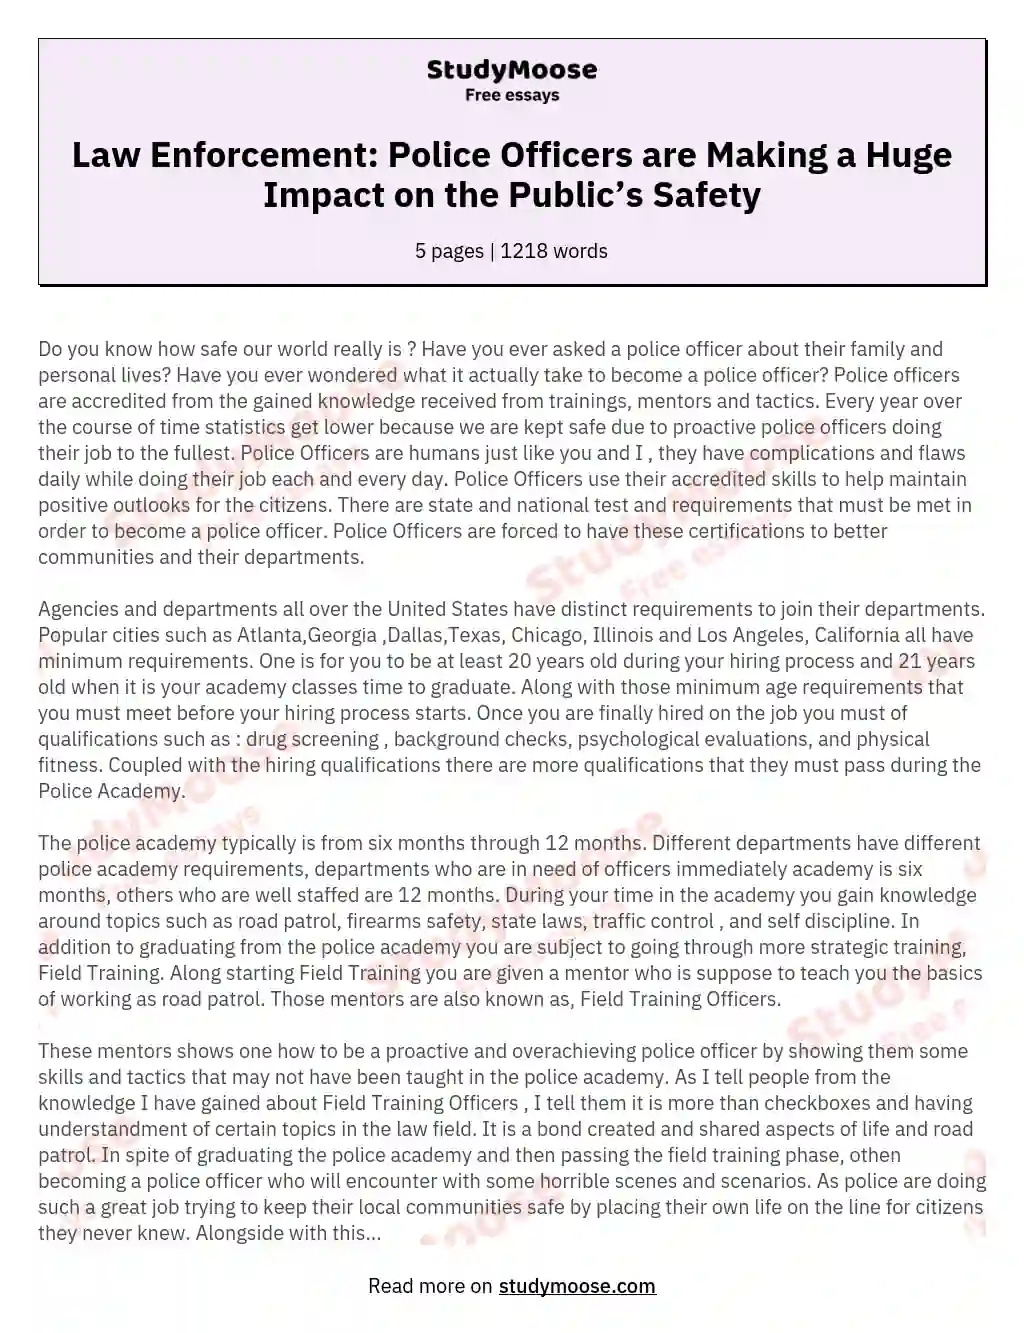 Law Enforcement:  Police Officers are Making a Huge Impact on the Public’s Safety essay